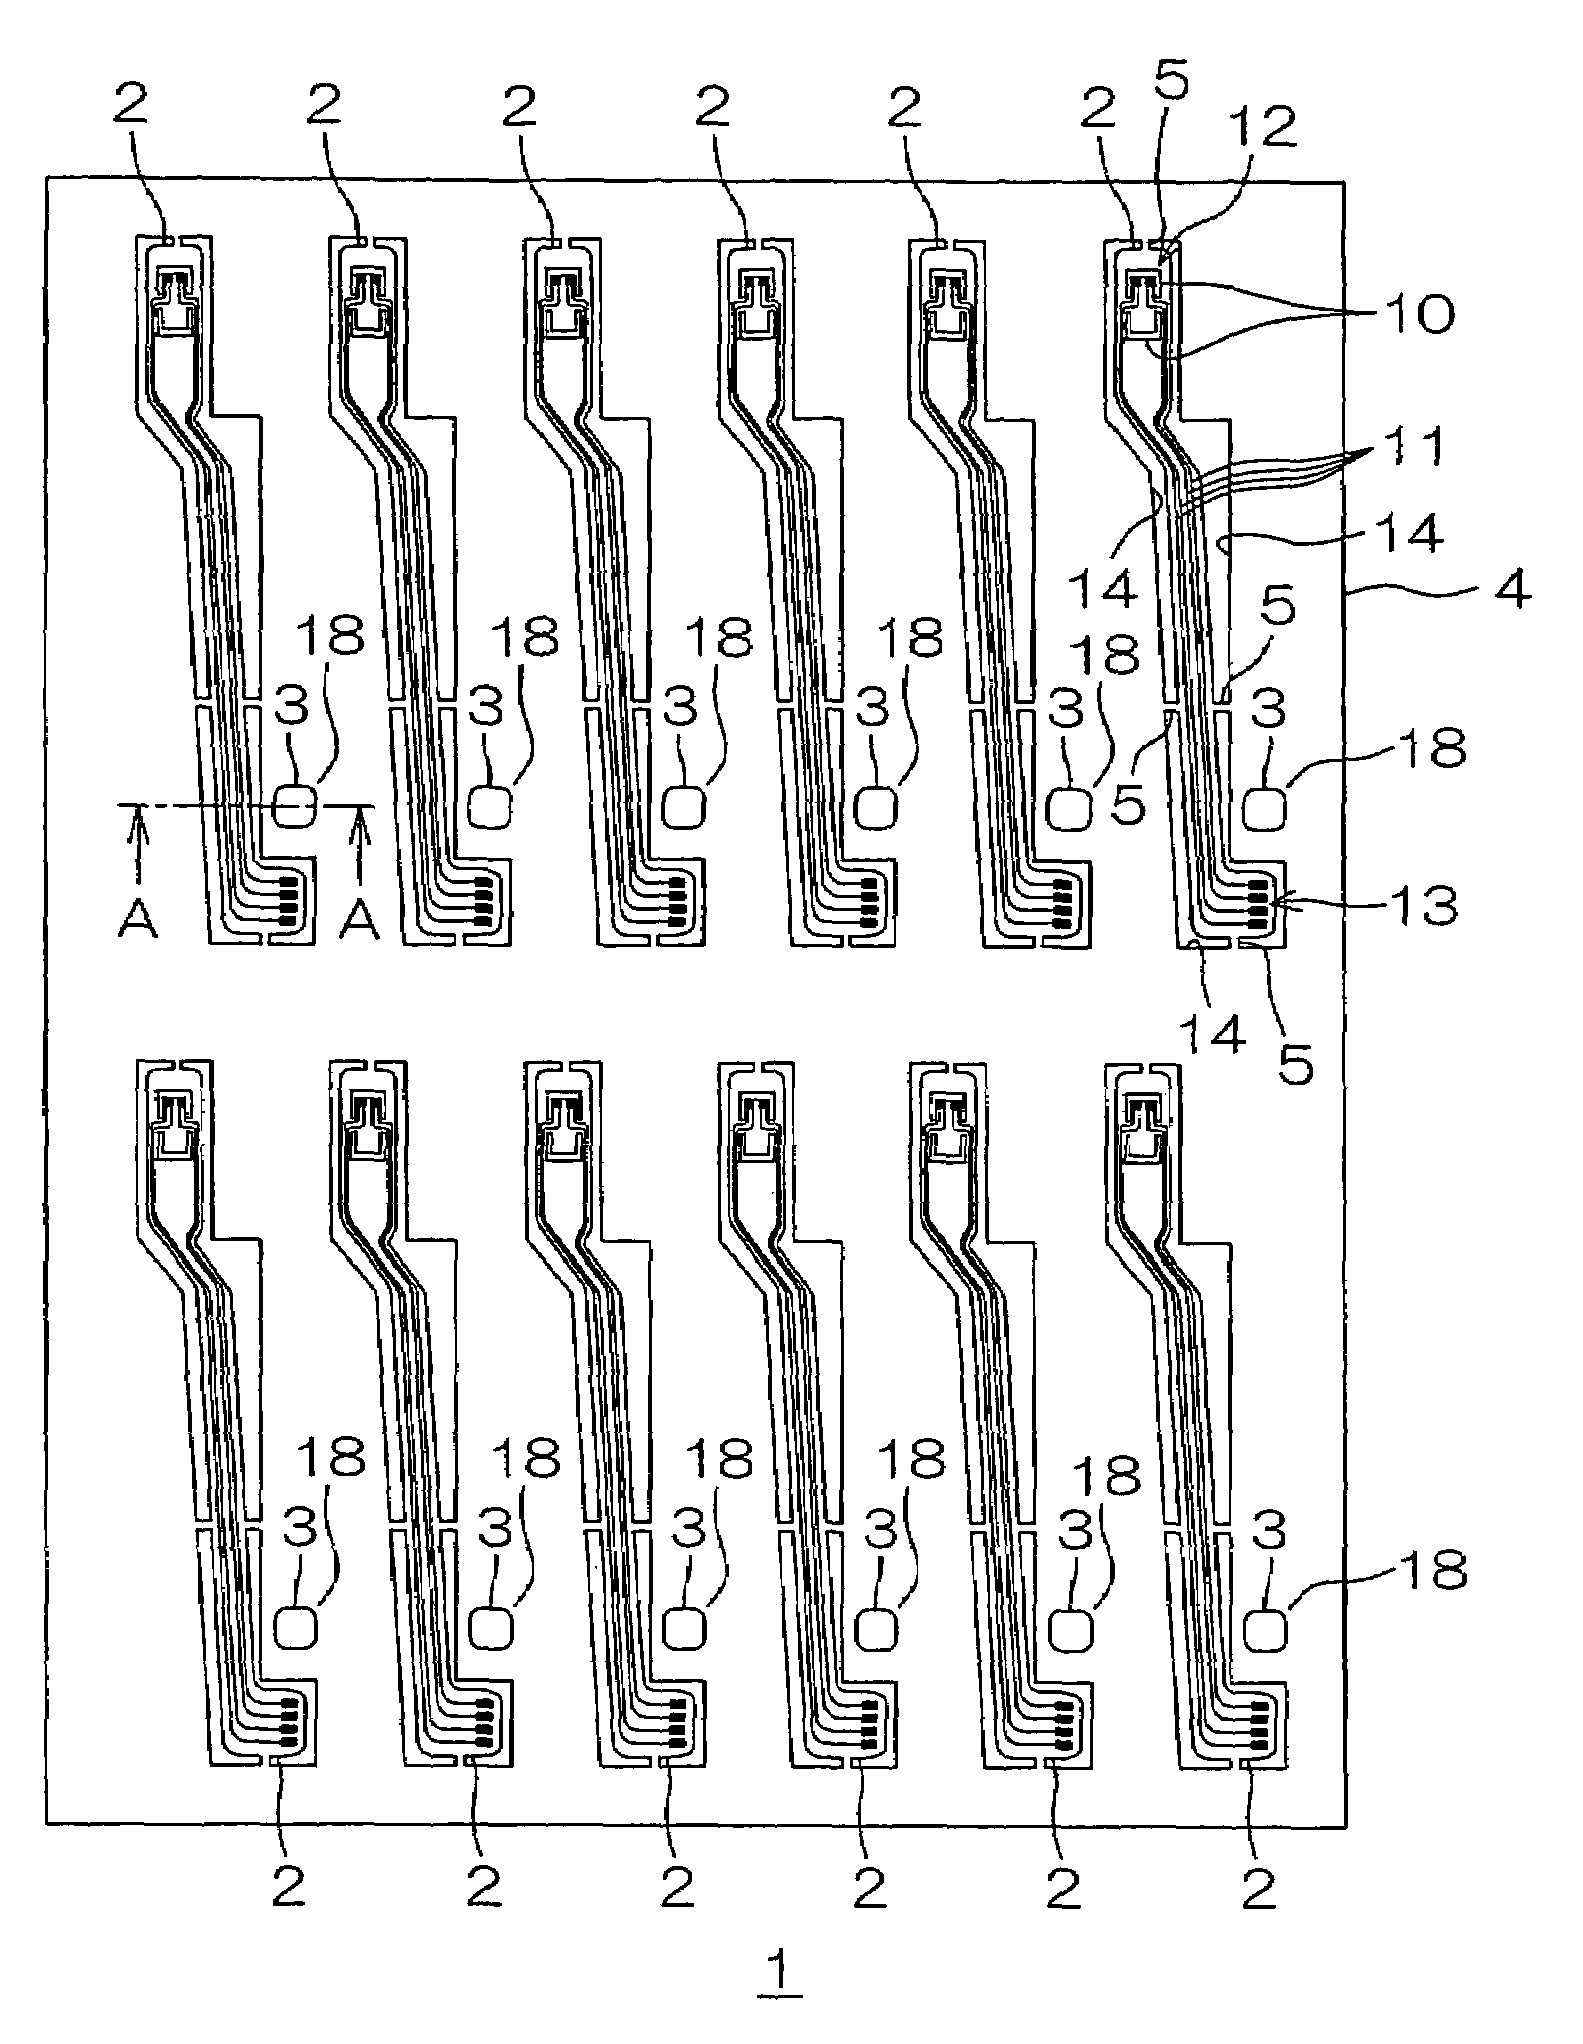 Wired-circuit-board assembly sheet